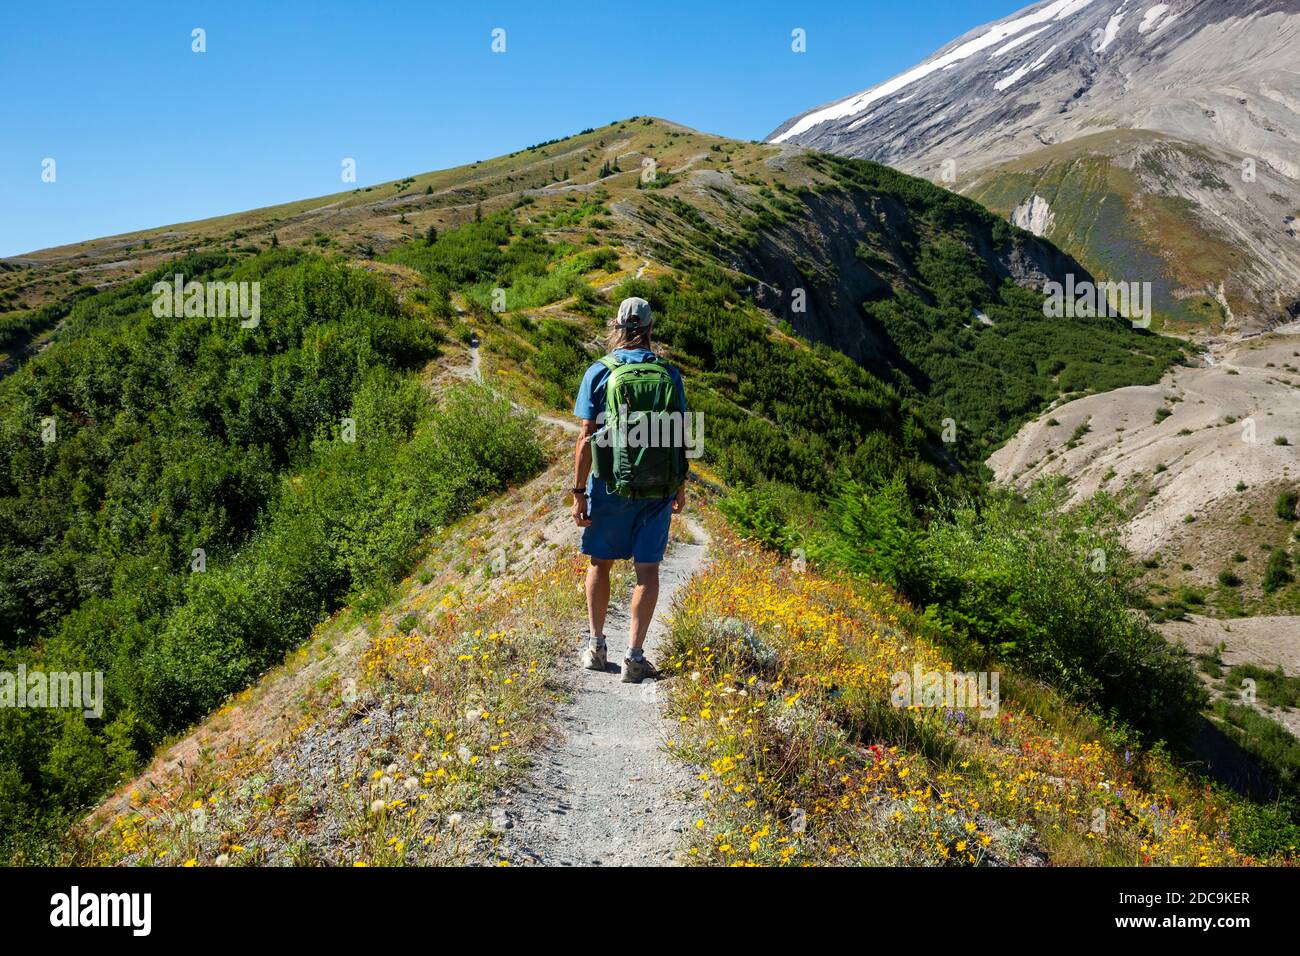 WA18298-00...WASHINGTON - Hiker exploring the Mount St Helens National Volcanic Monument 40 years after the eruption. Stock Photo